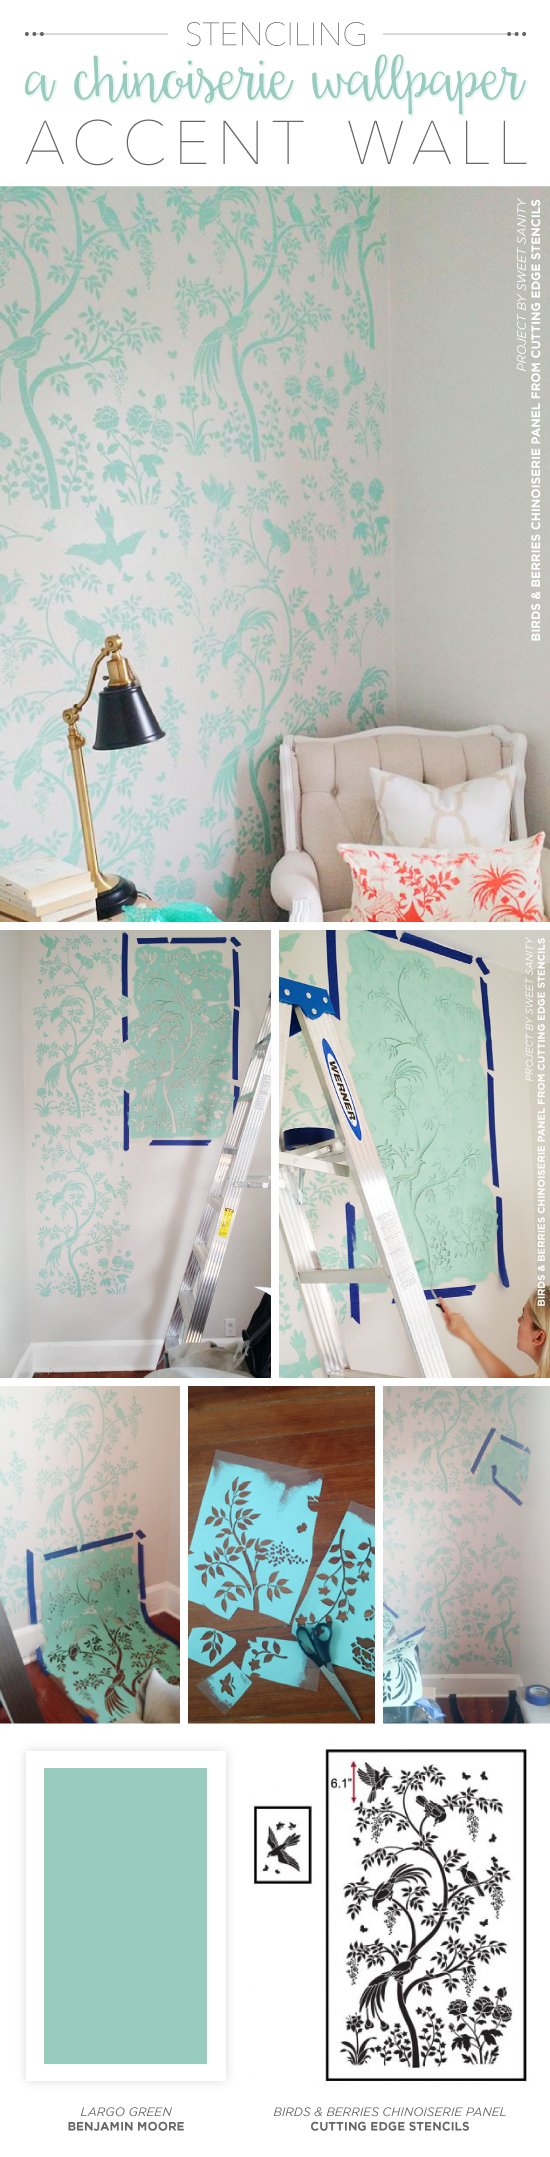 Cutting Edge Stencils shares how to stencil the Chinoiserie Birds and Berries Wall Mural Panel for a wallpaper look. http://www.cuttingedgestencils.com/chinoiserie-stencil-mural-wall-design-wallpaper.html